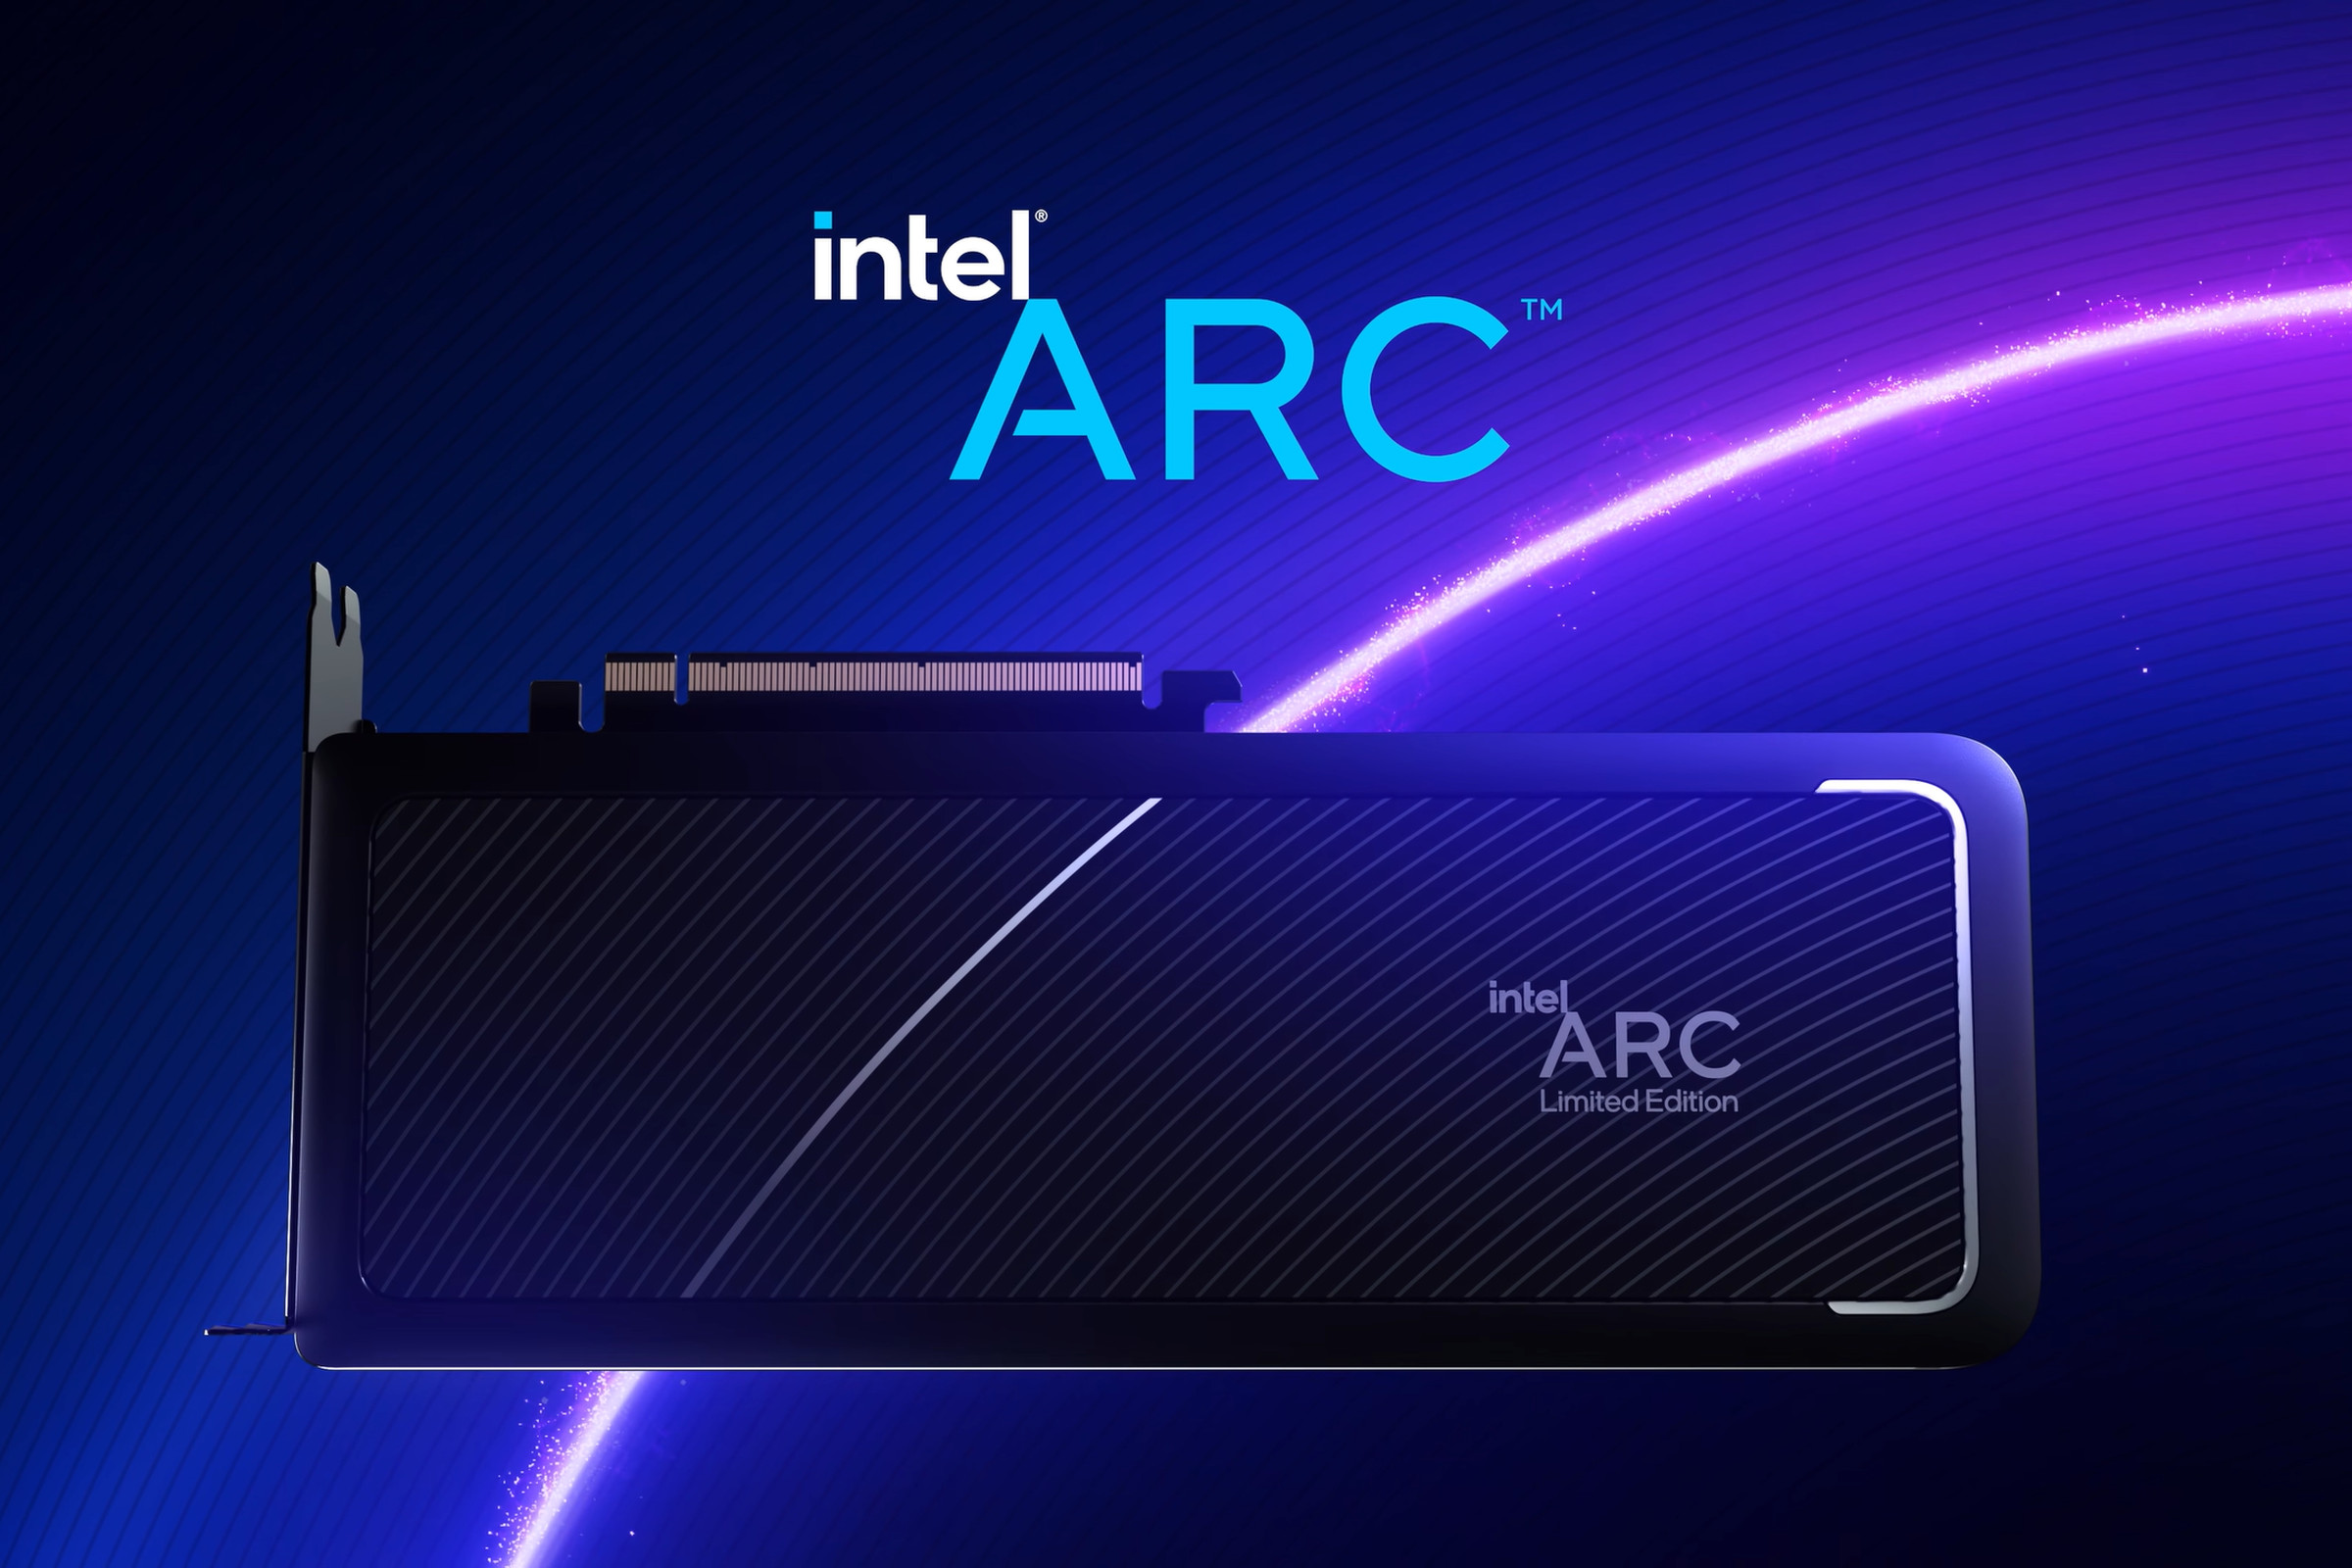 Product shot of one of Intel’s new Arc graphics cards with the text Intel Arc displayed